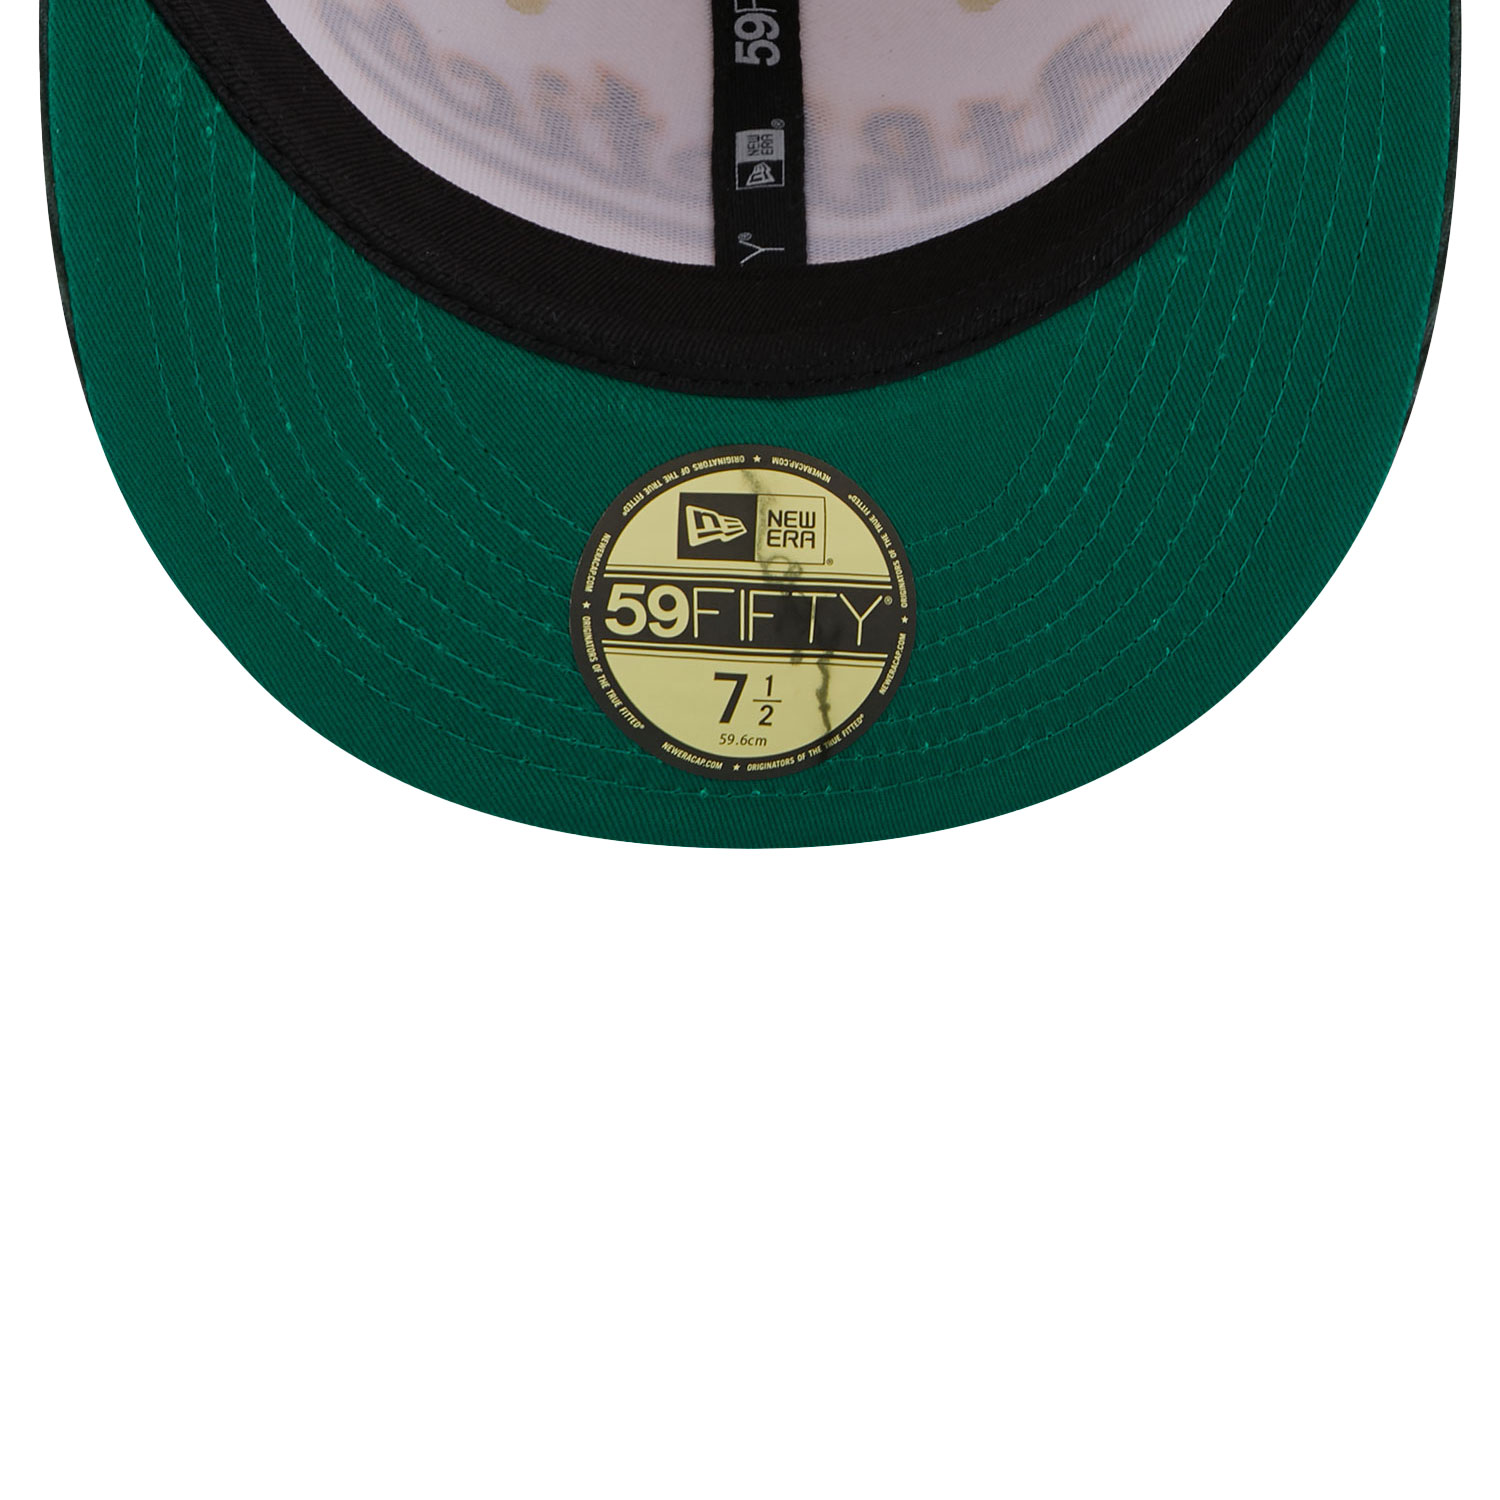 Oakland Athletics Vintage Cord White 59FIFTY Fitted Cap